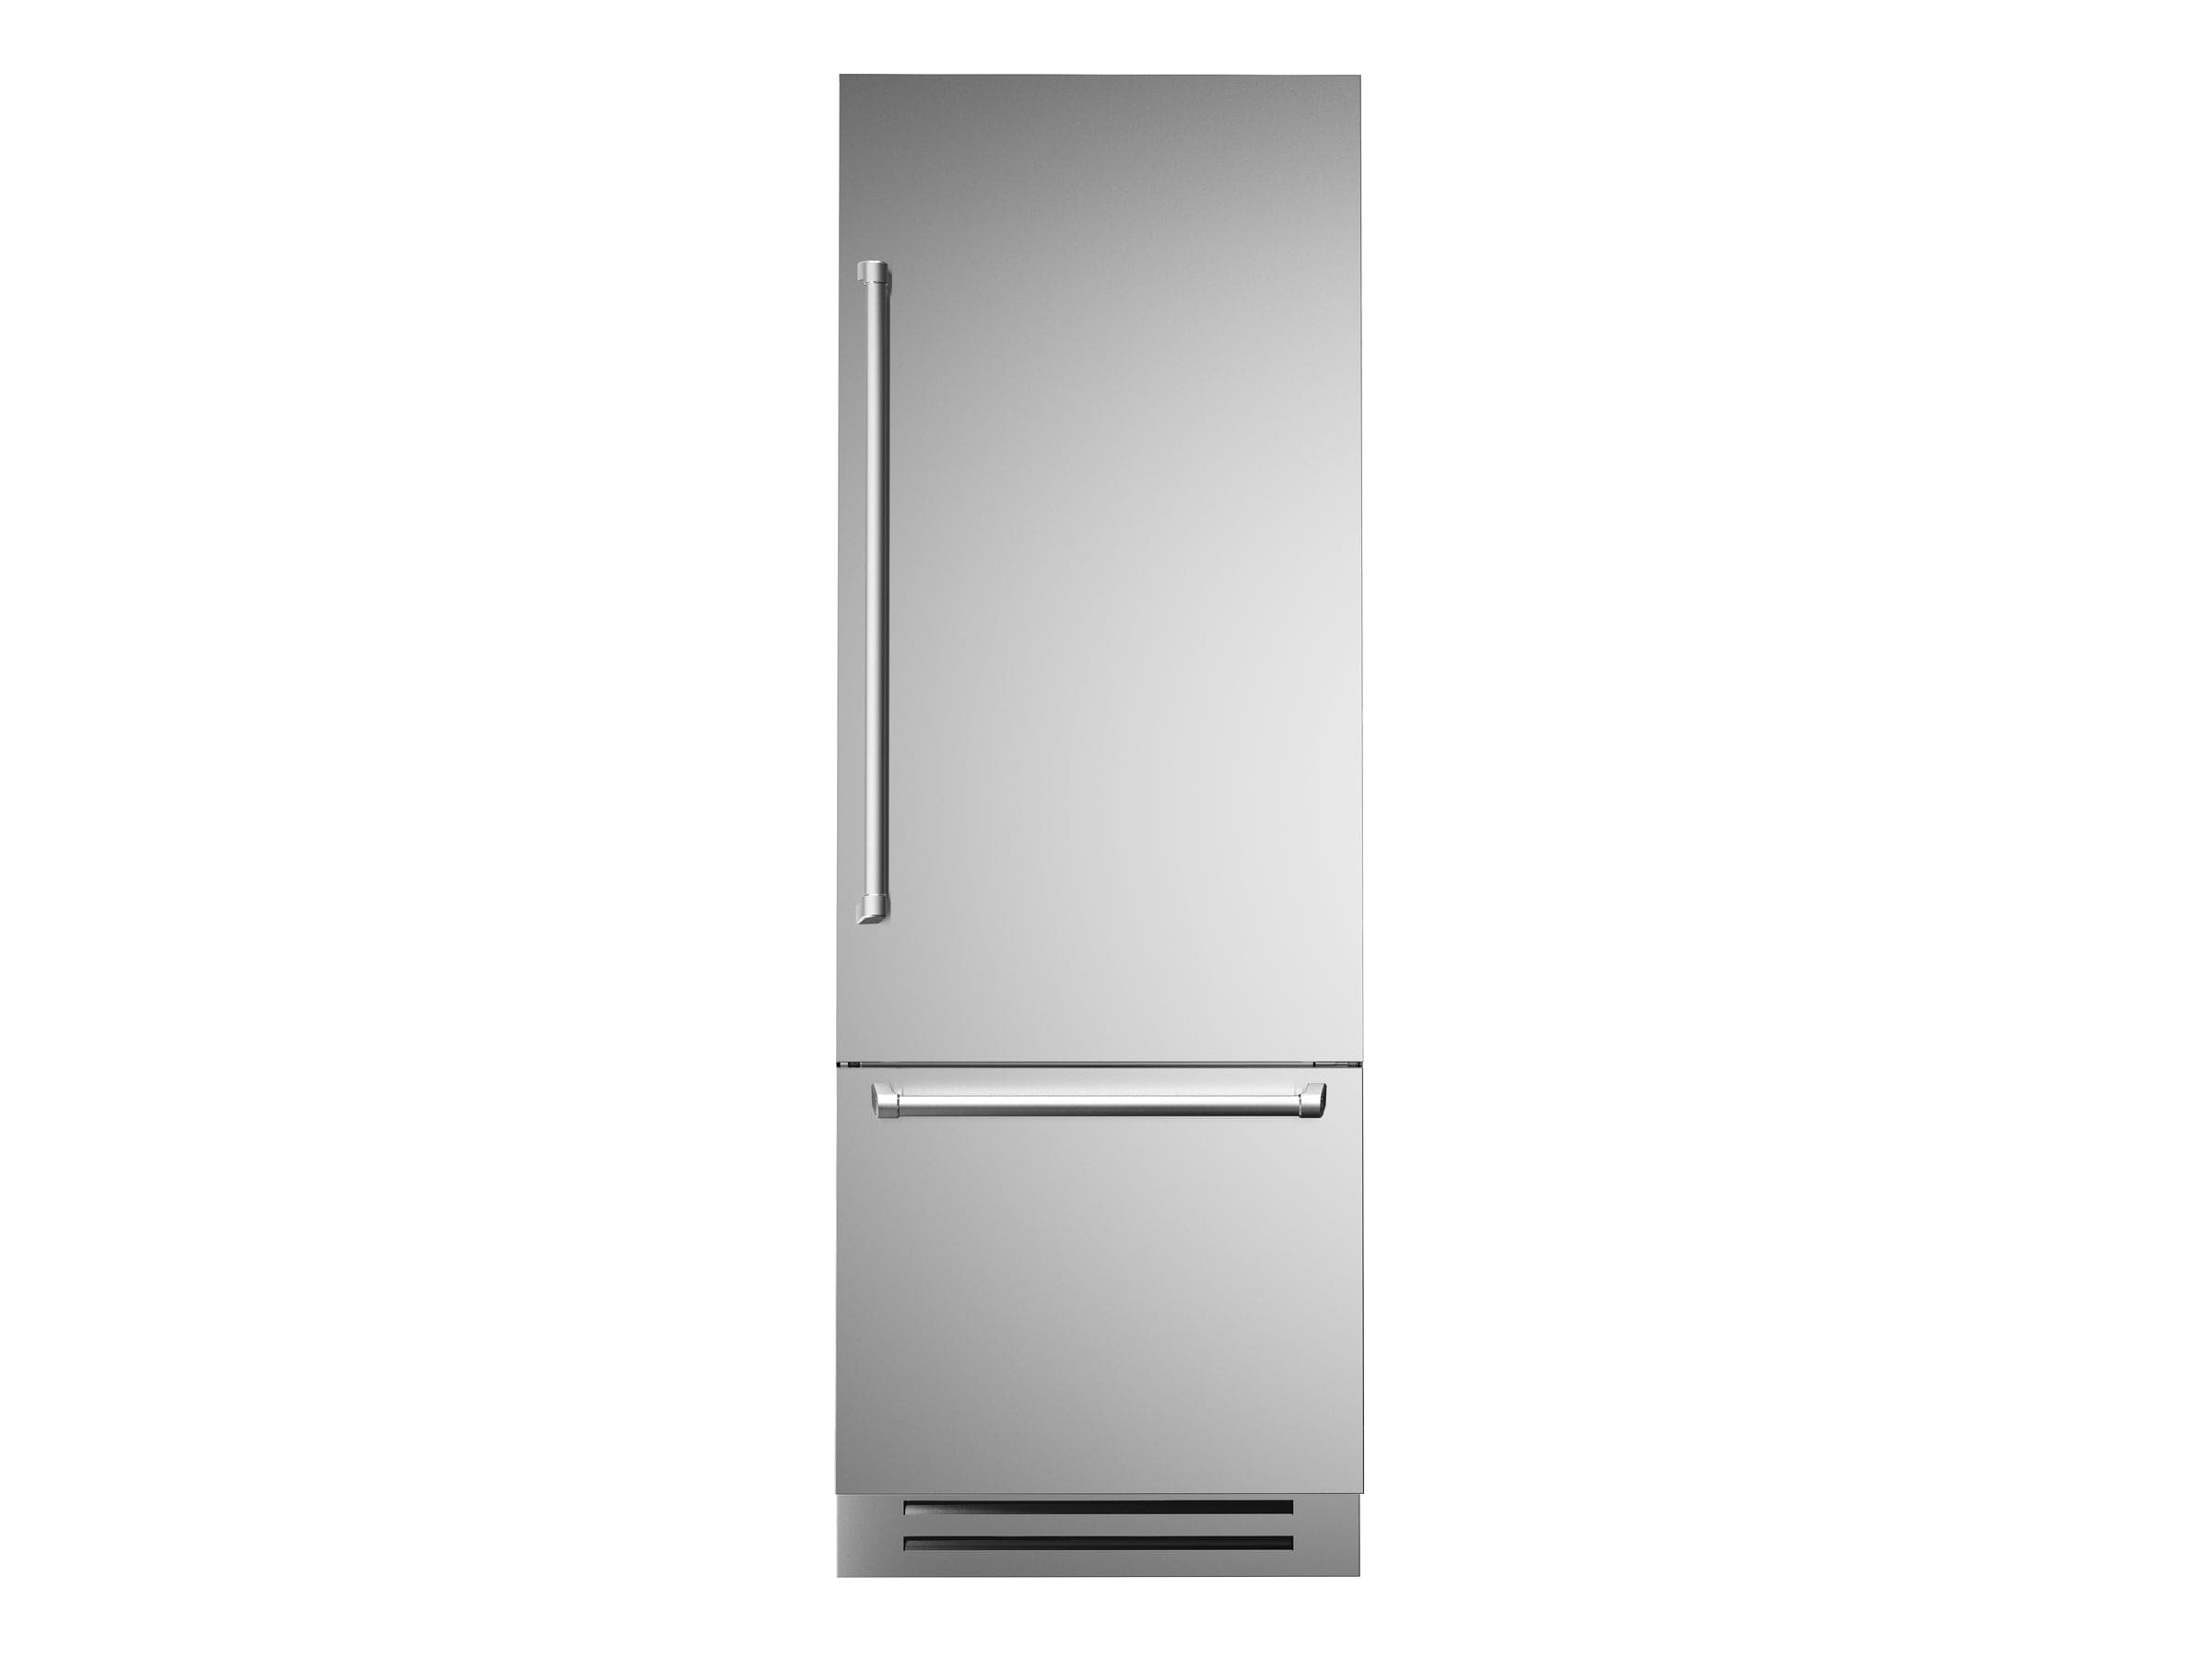 Bertazzoni 30" 15.5 Cu.Ft. Stainless Steel Built-In Bottom Mount Refrigerator With Ice Maker and Right Swing Door REF30BMBIXRT Luxury Appliances Direct